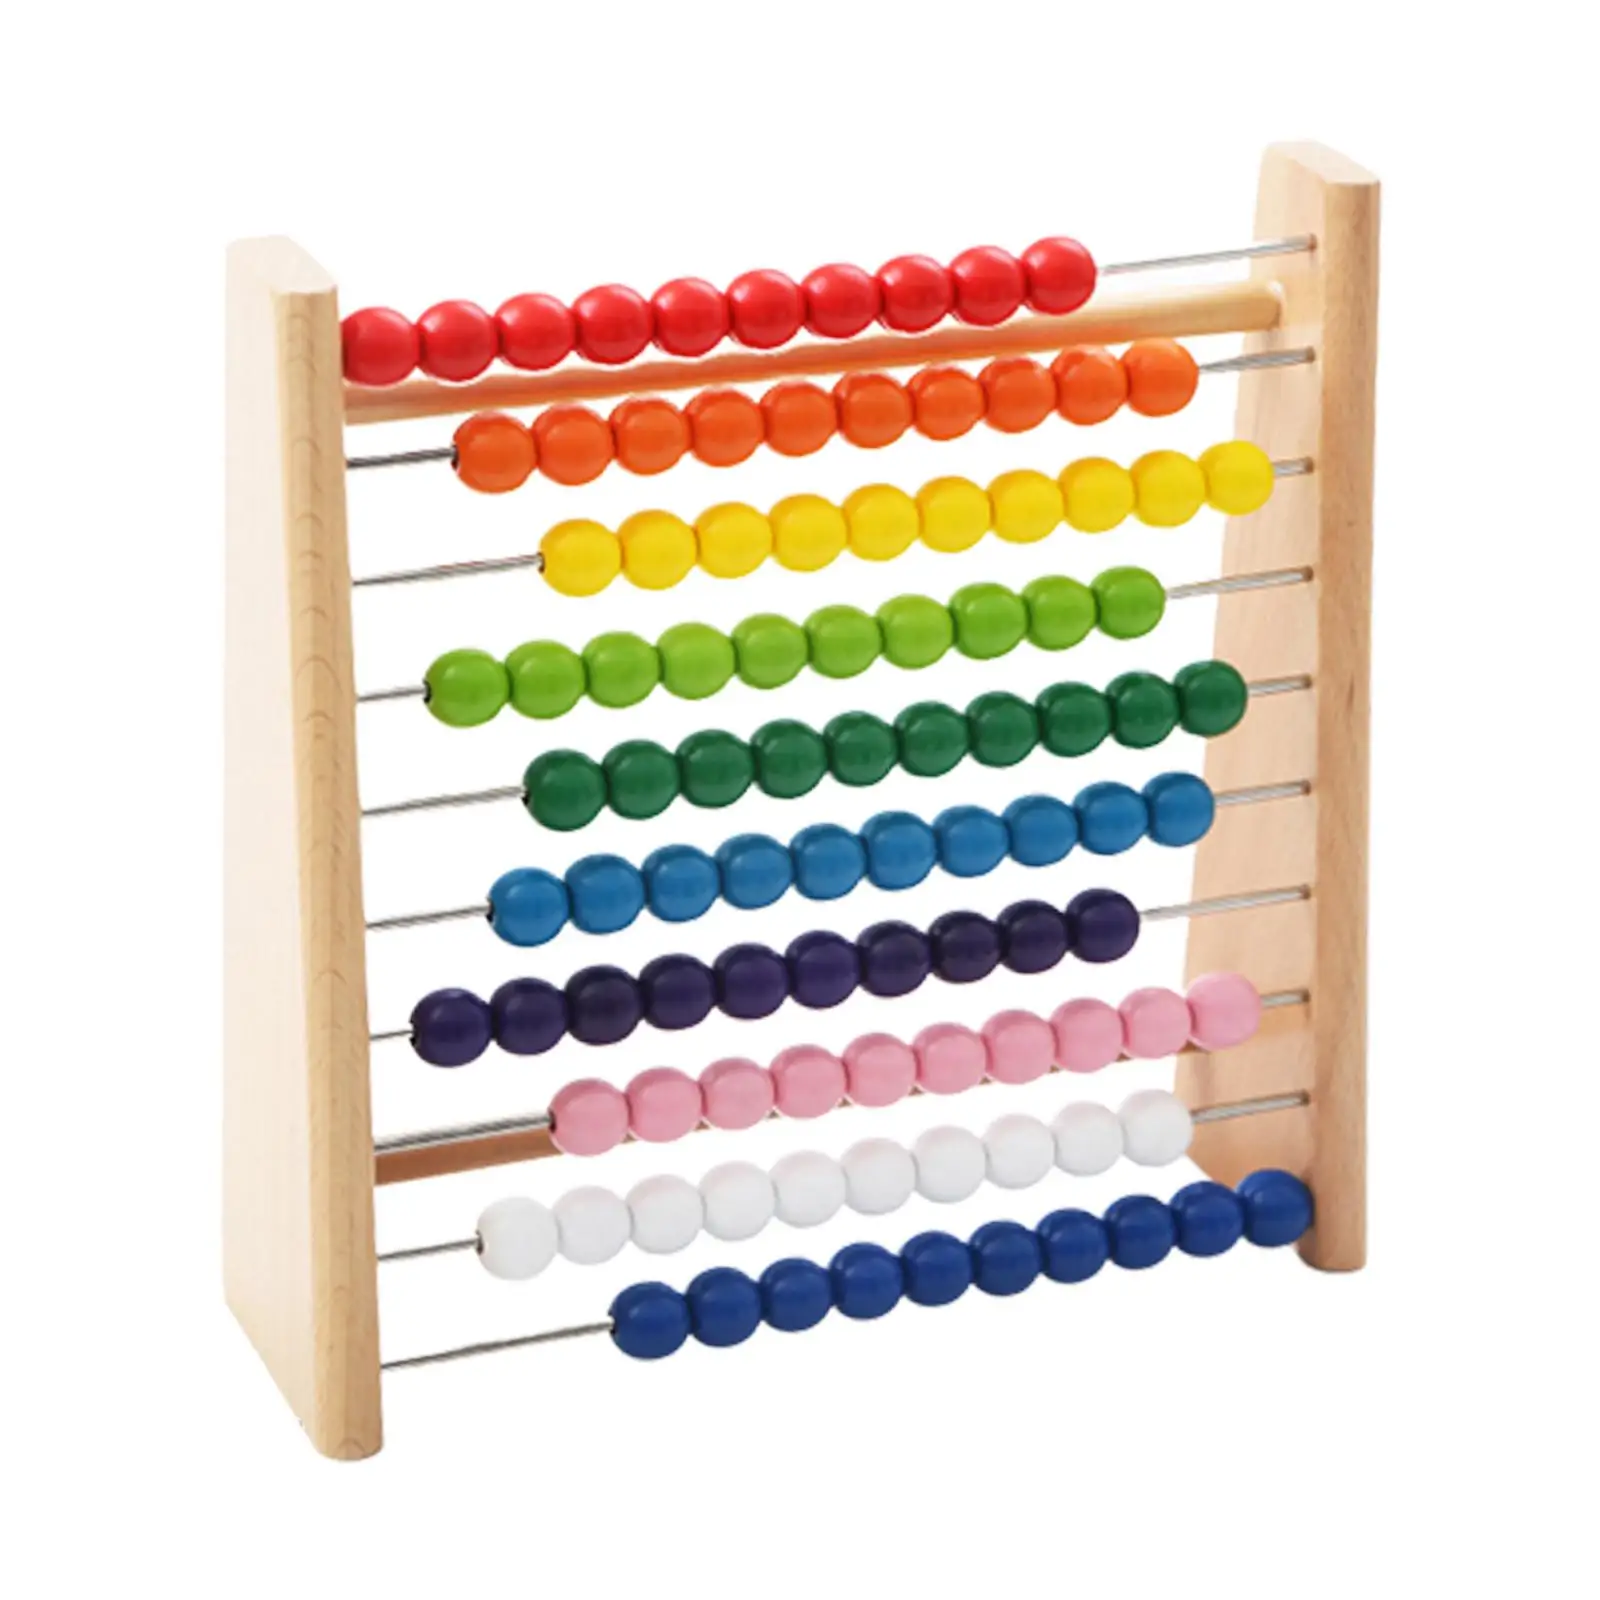 Montessori Math Toy Math Teaching Aids 10 Row Classic Counting Tool Calculating Beads Abacus for Children Girls Kids Boys Gifts